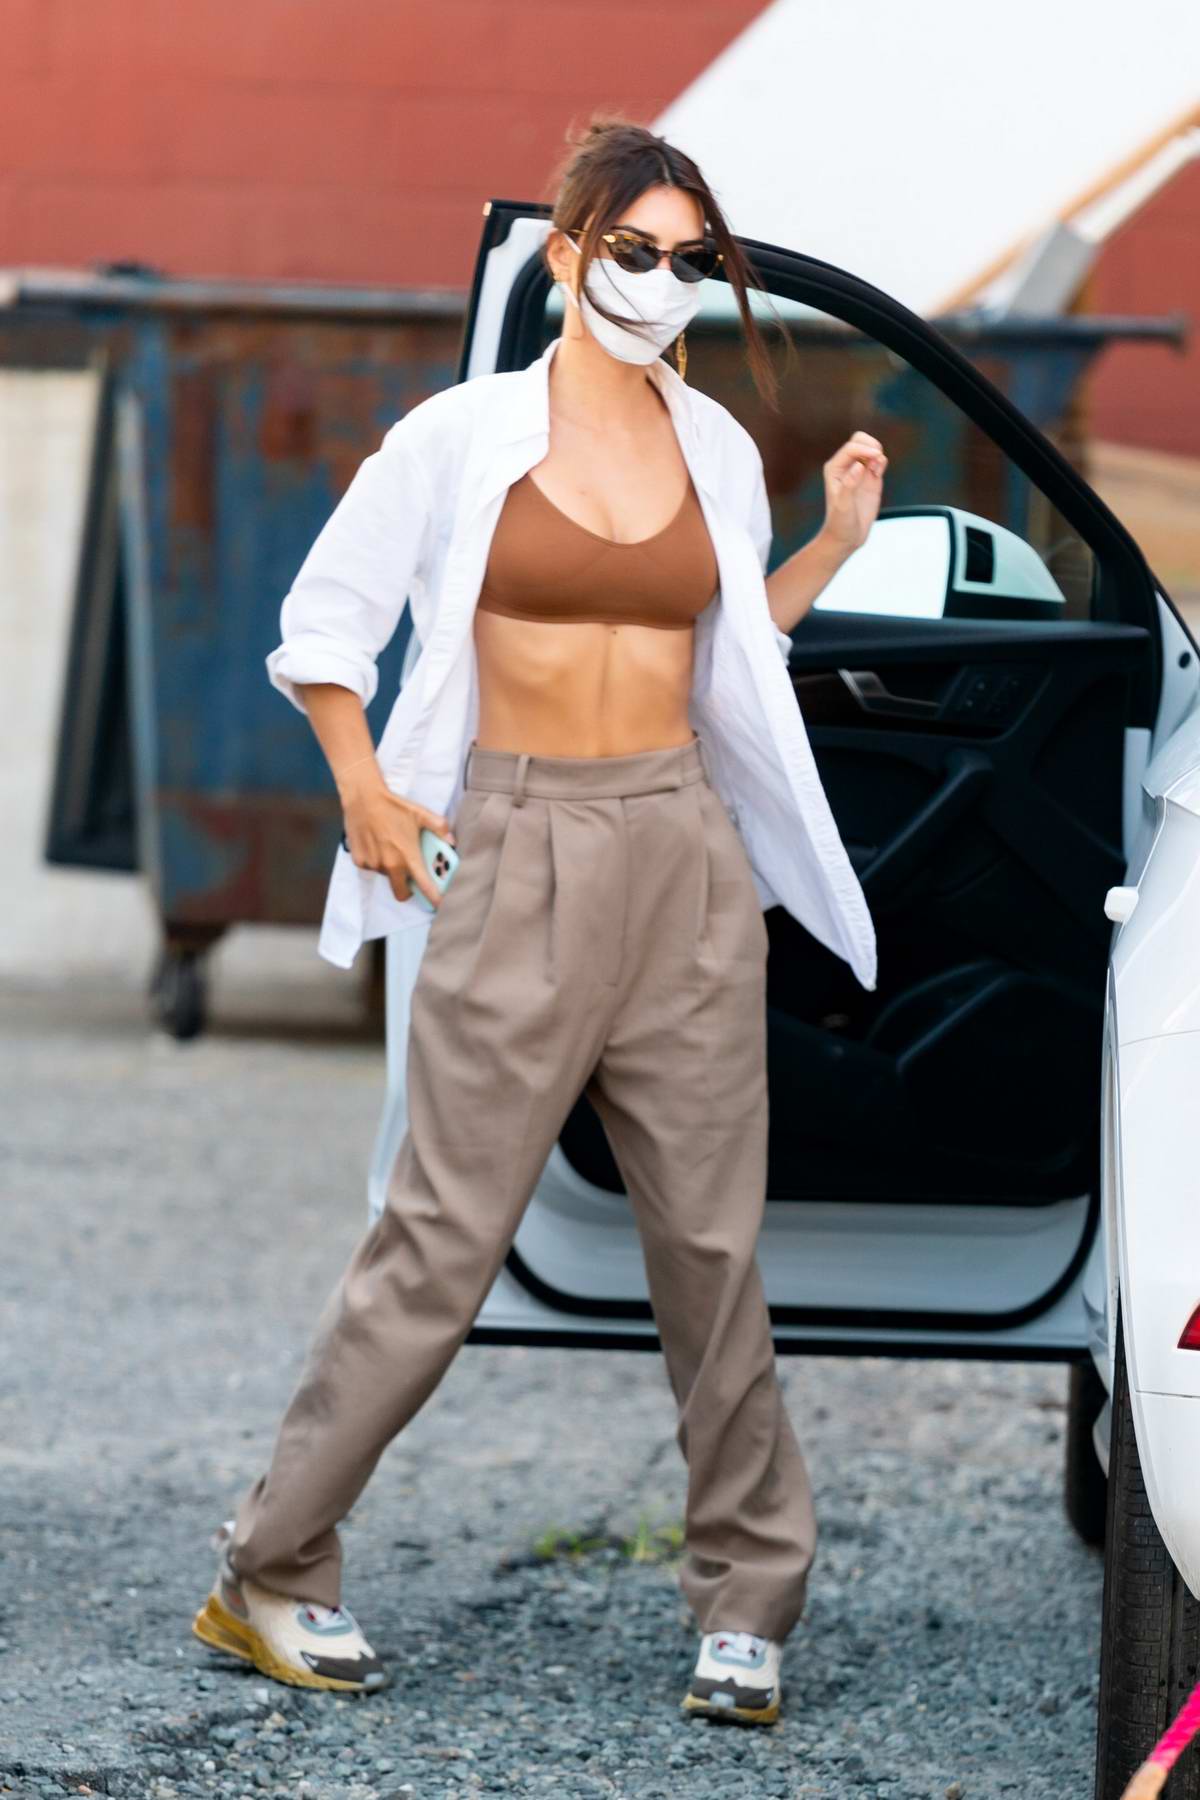 https://www.celebsfirst.com/wp-content/uploads/2020/07/emily-ratajkowski-rocks-a-white-shirt-over-a-sports-bra-while-heading-out-with-a-friend-in-new-york-city-280720_1.jpg